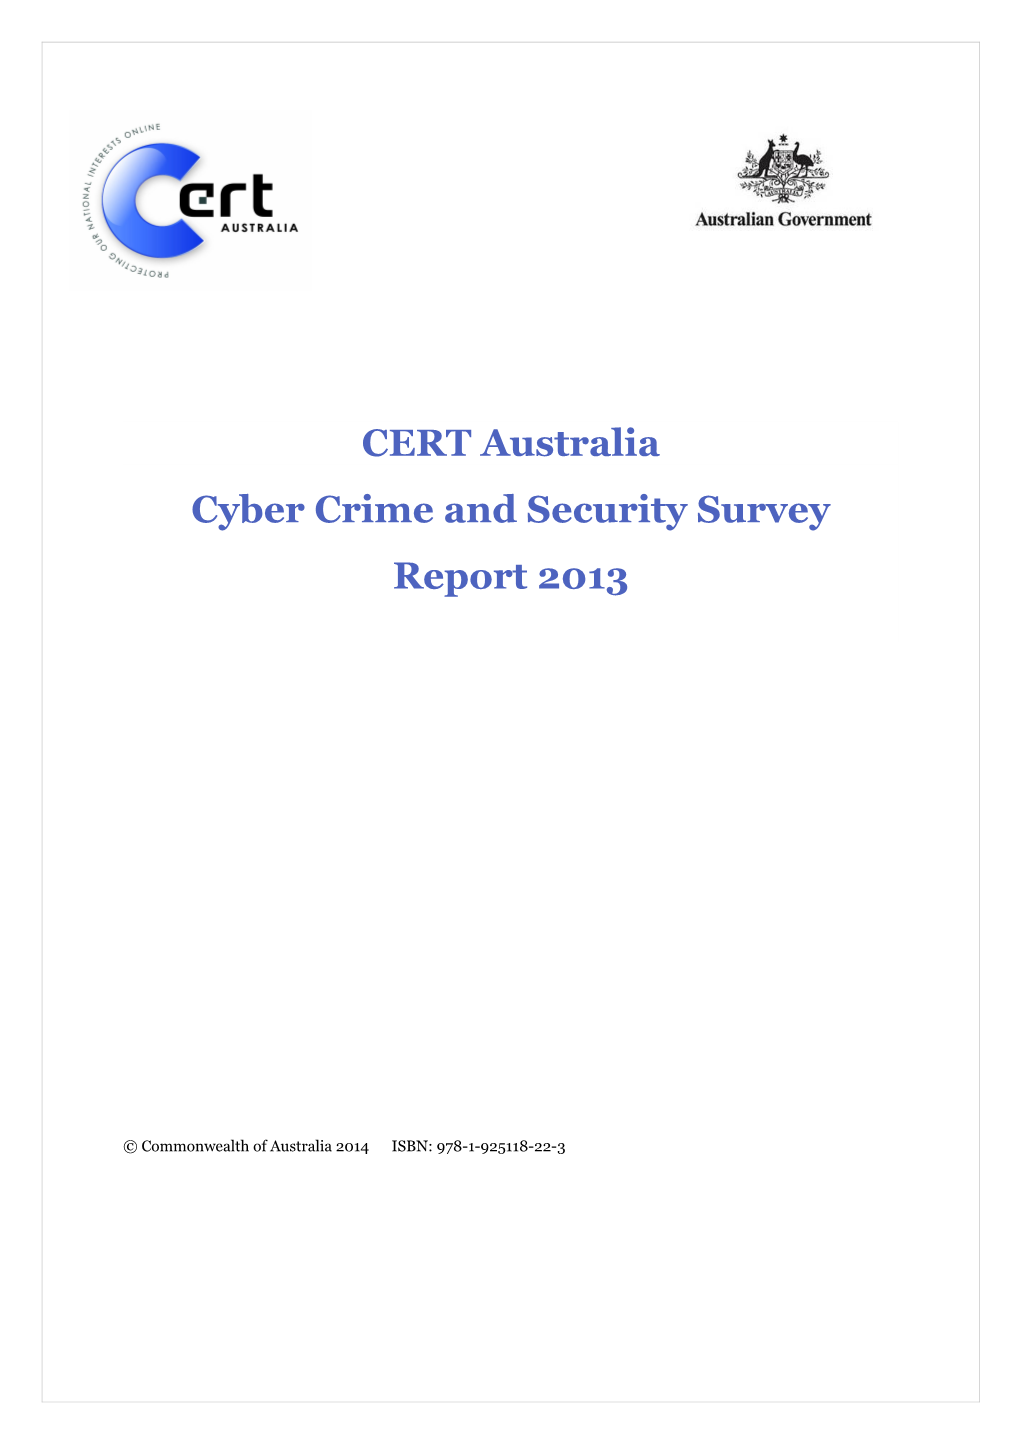 Cyber Crime and Security Survey